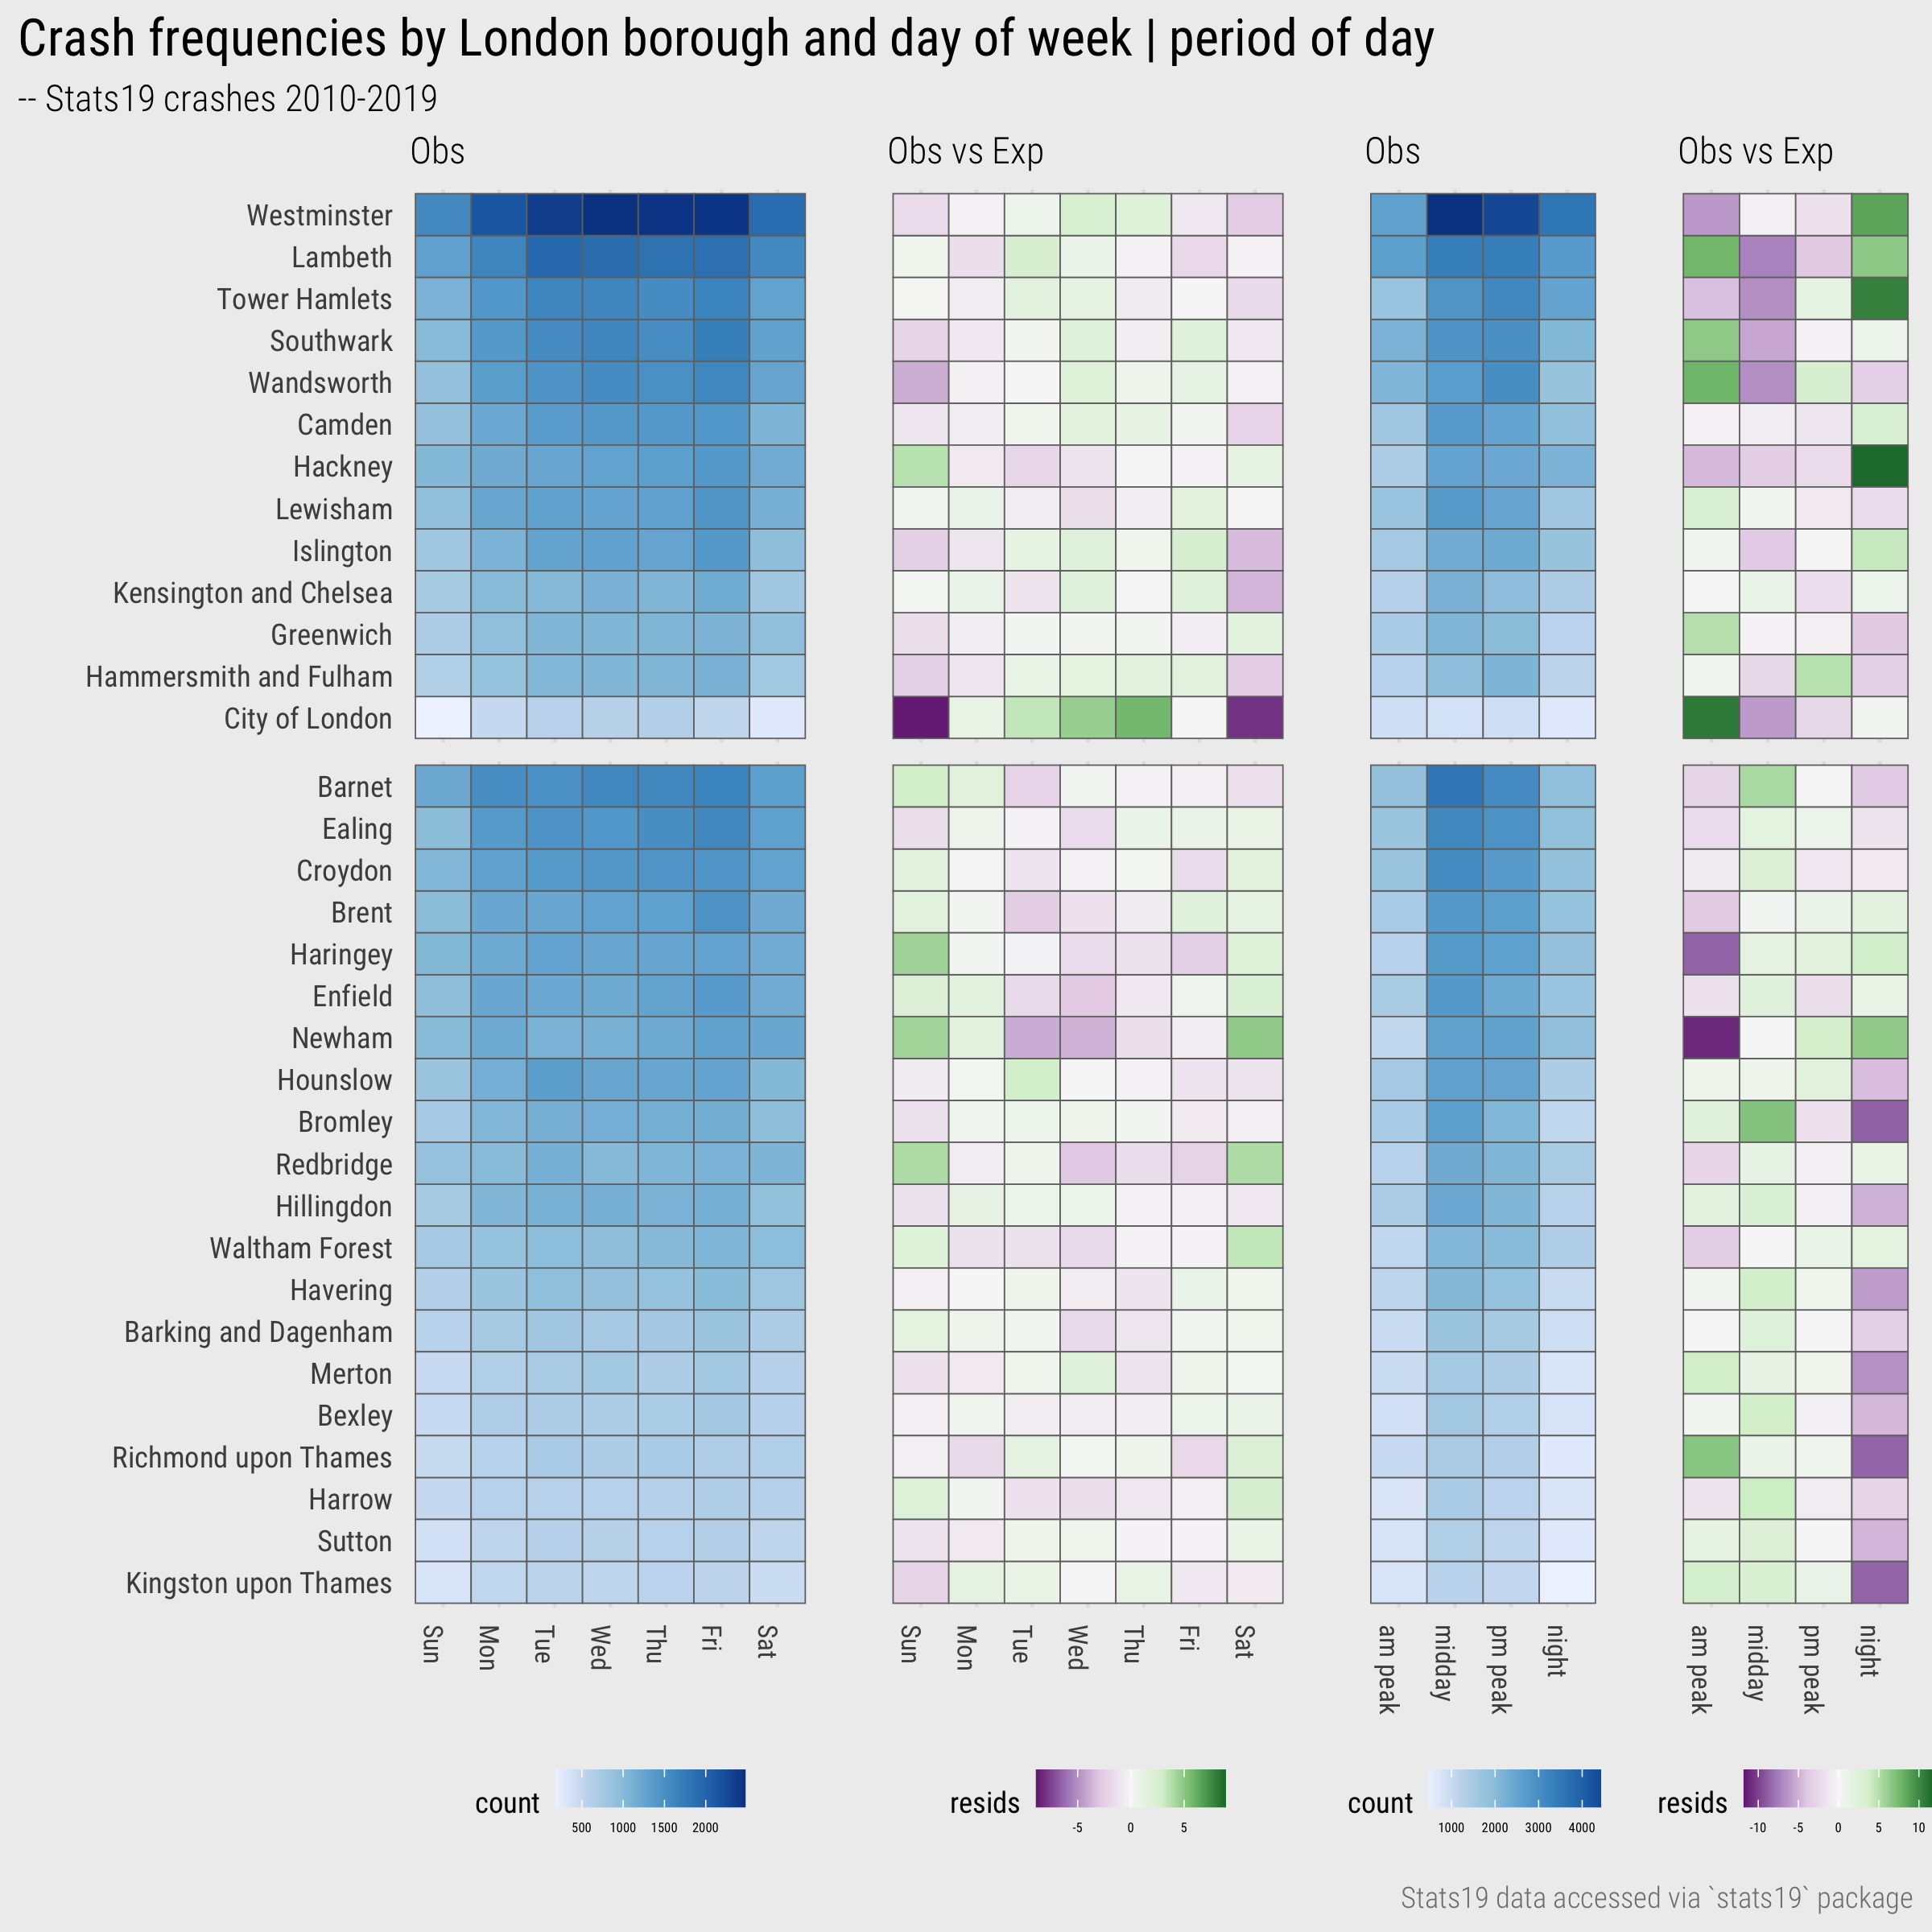 Heatmaps of crashes by day and time period for London Boroughs.